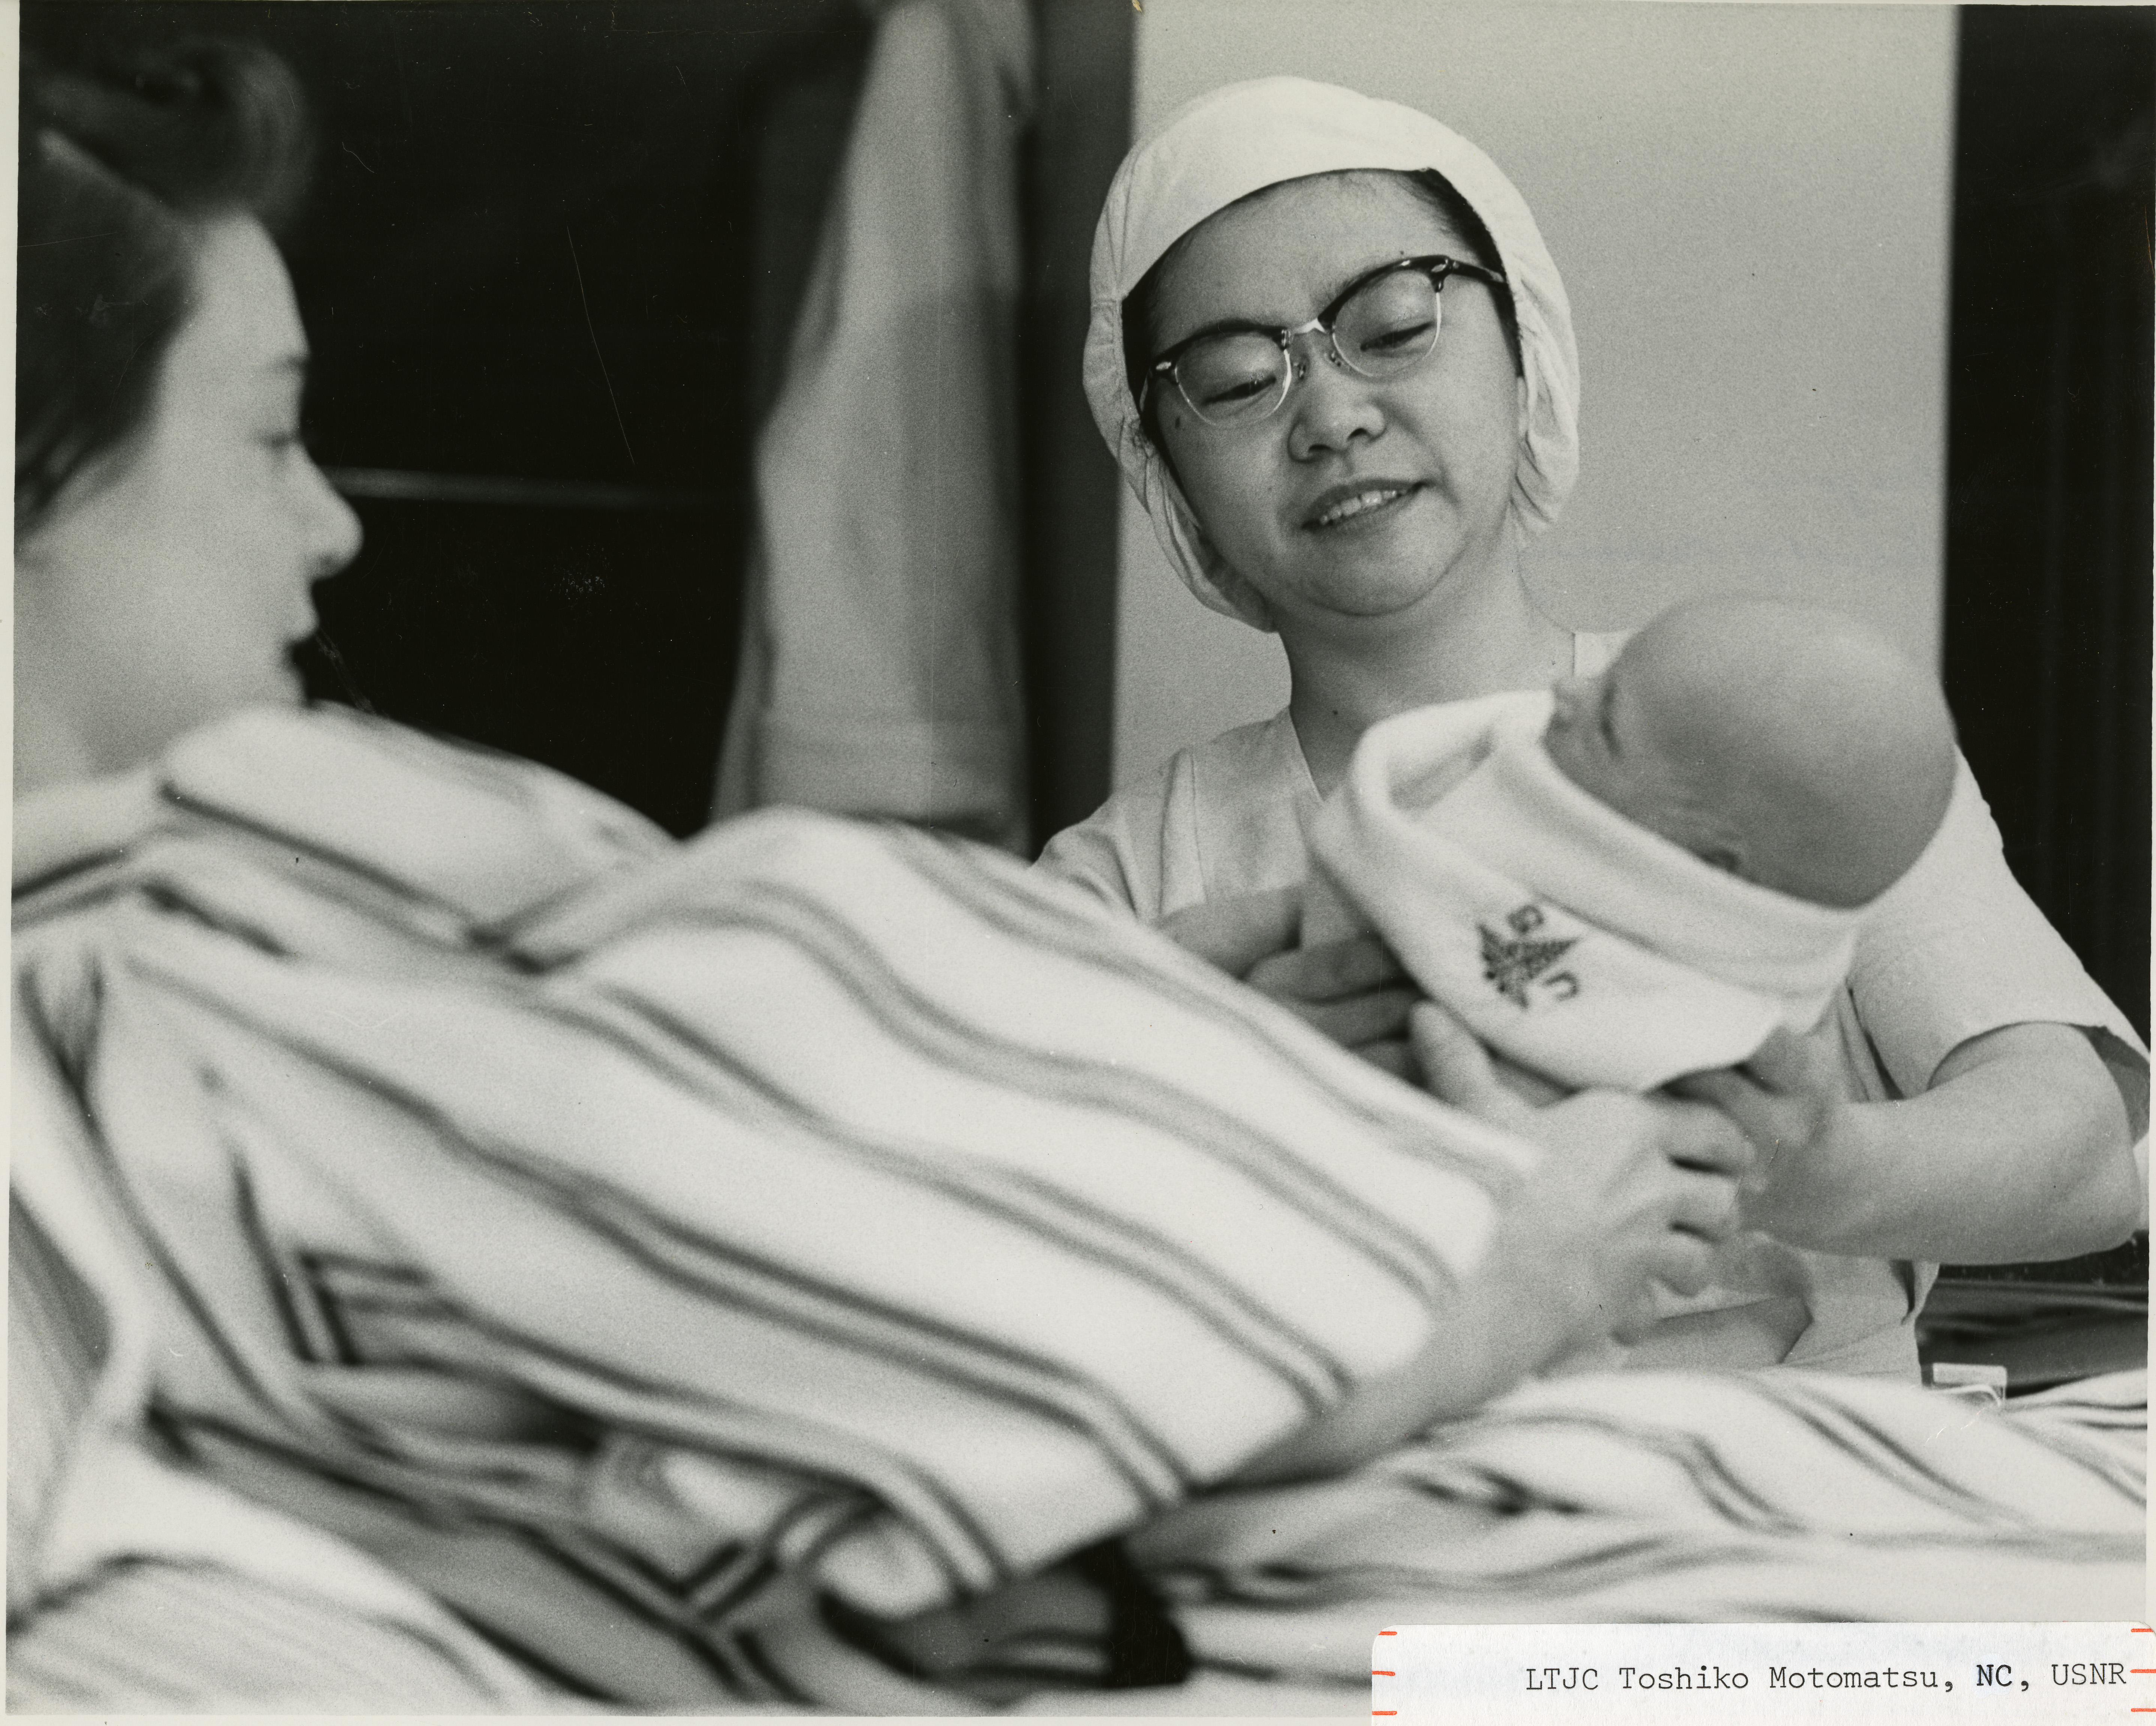 Toshiko Totomatsu working as a Labor & Delivery nurse in the Army Nursing Corps, 1955